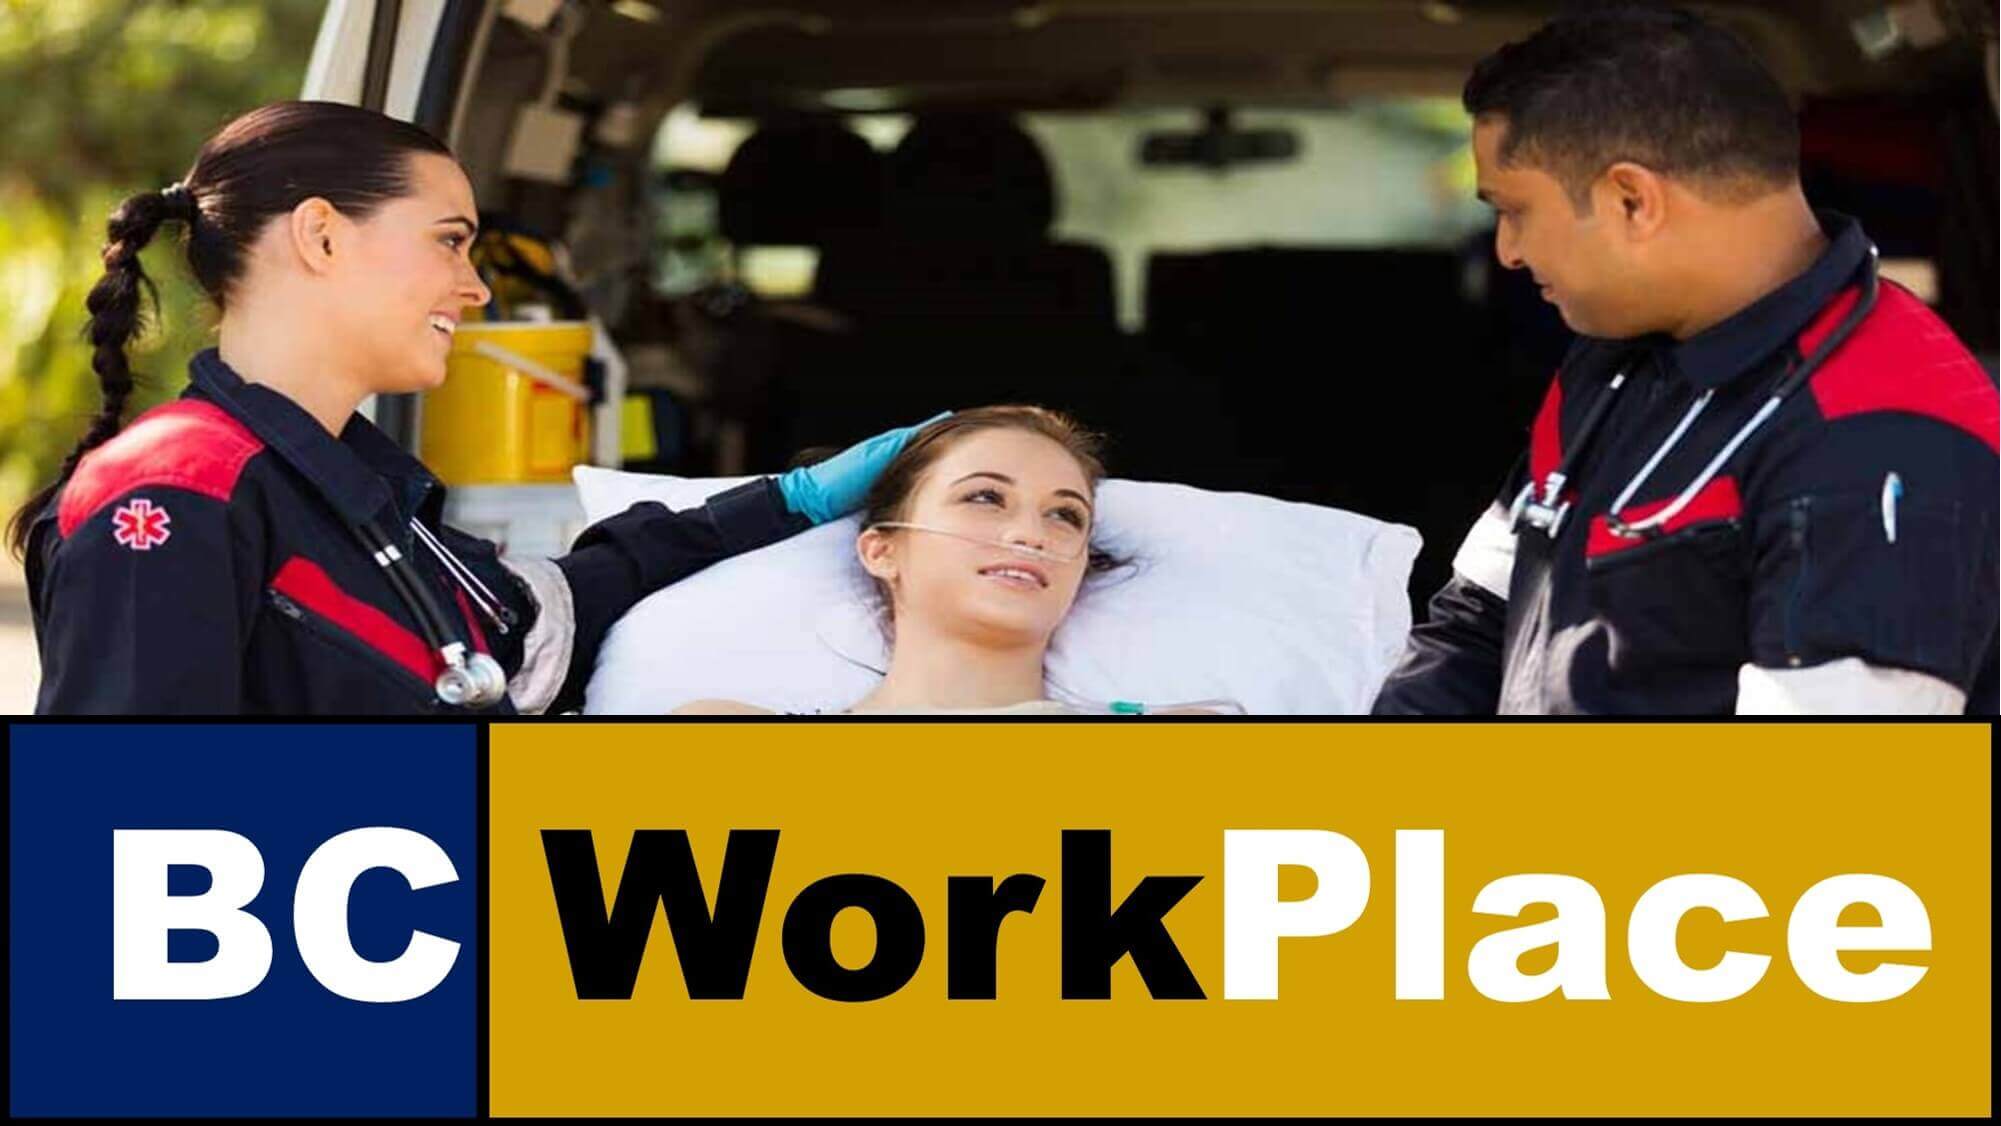 Worksafe First Aid Courses